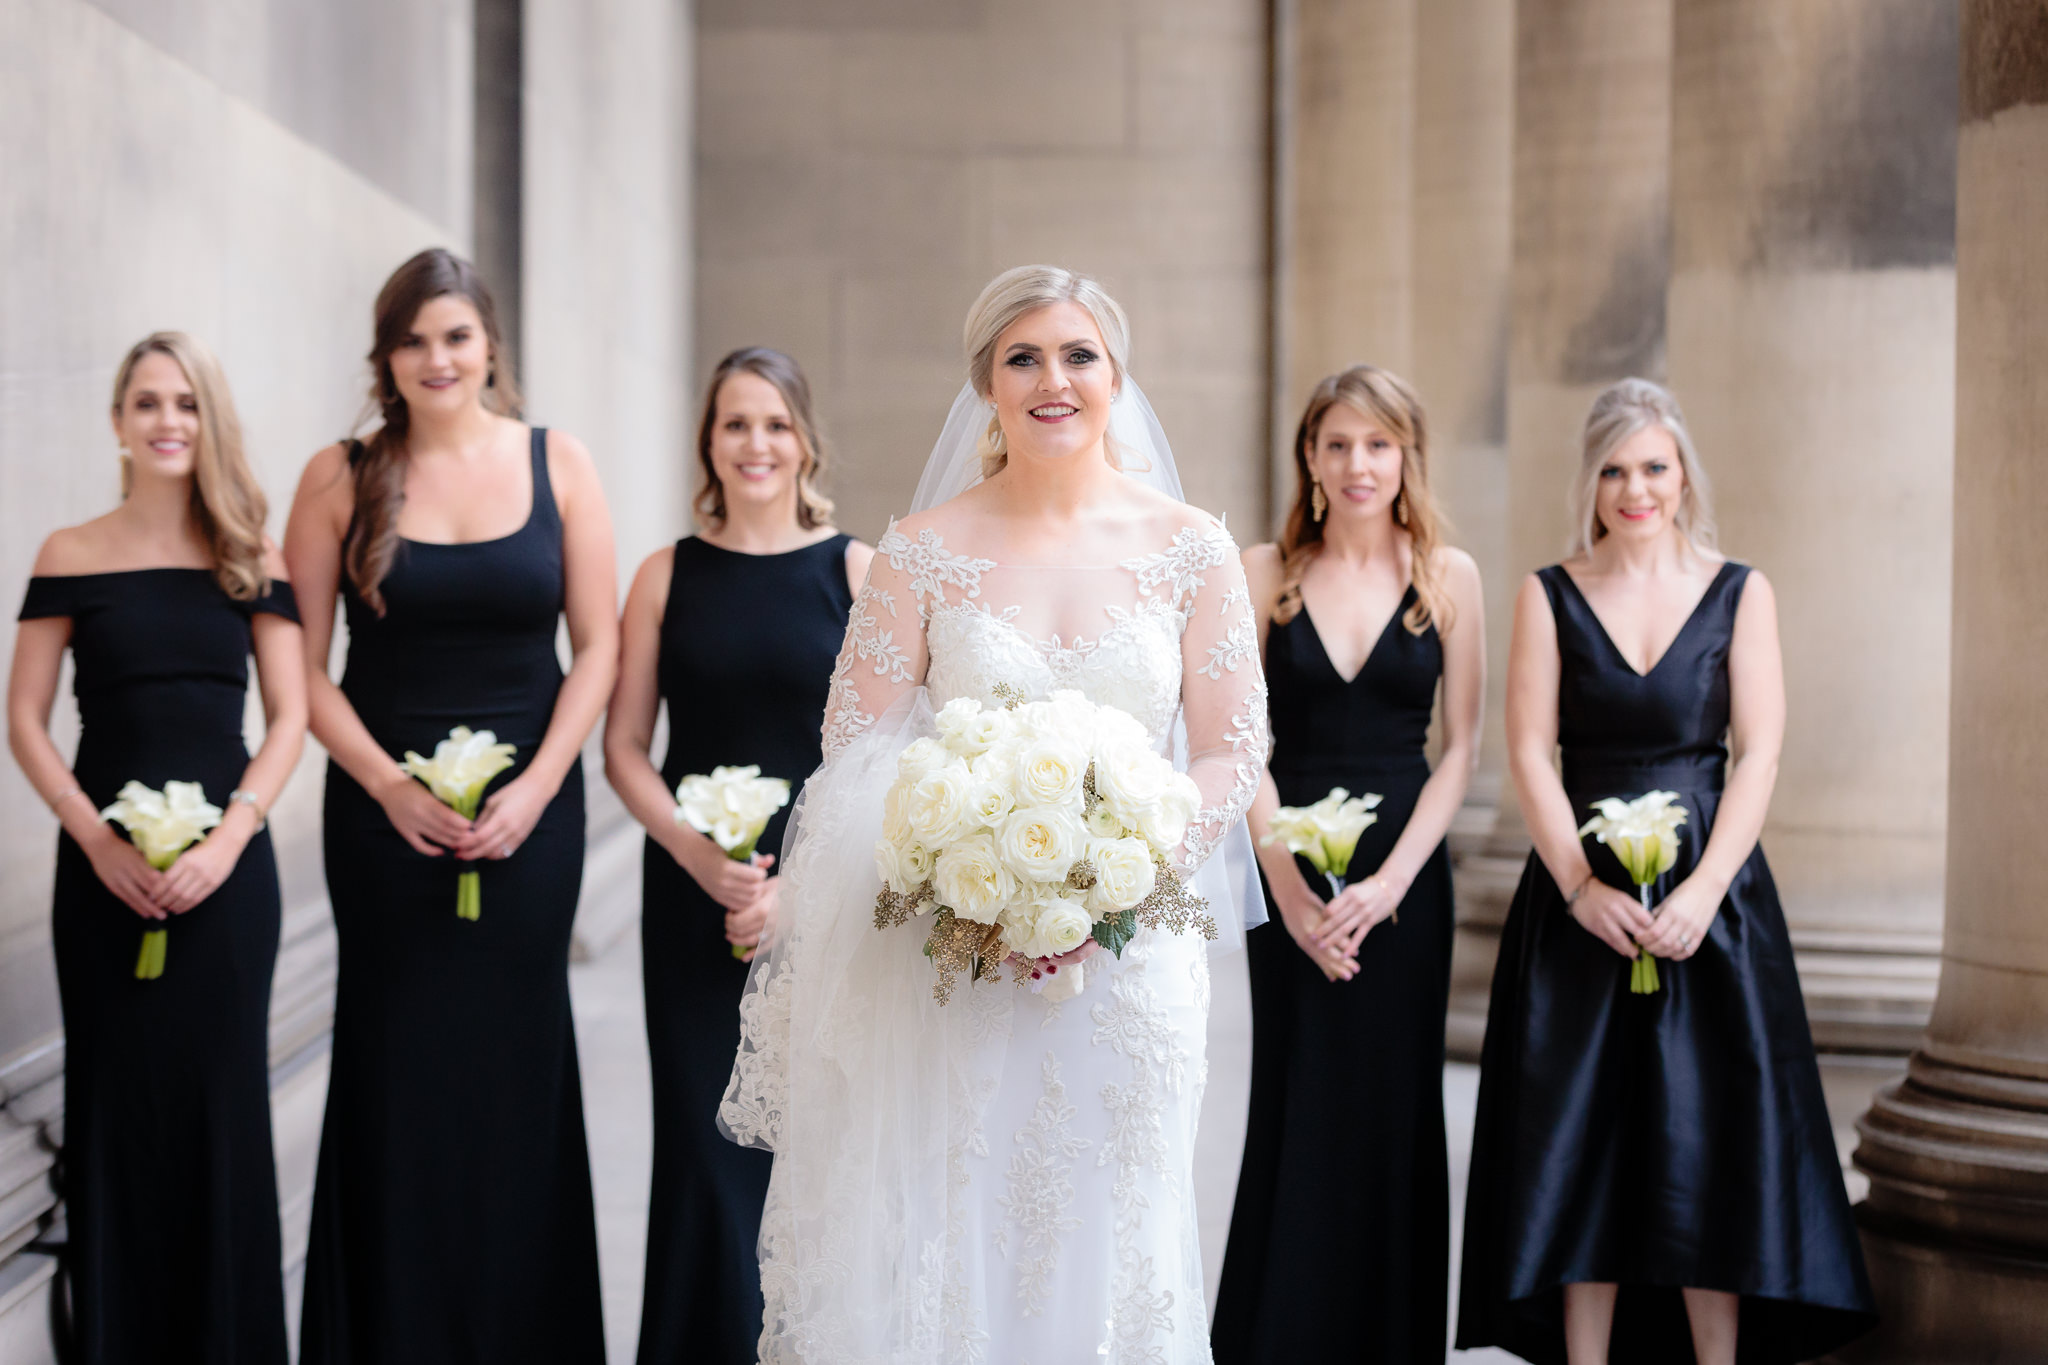 Bride in a Sottero & Midgley wedding dress with her bridesmaids in black dresses